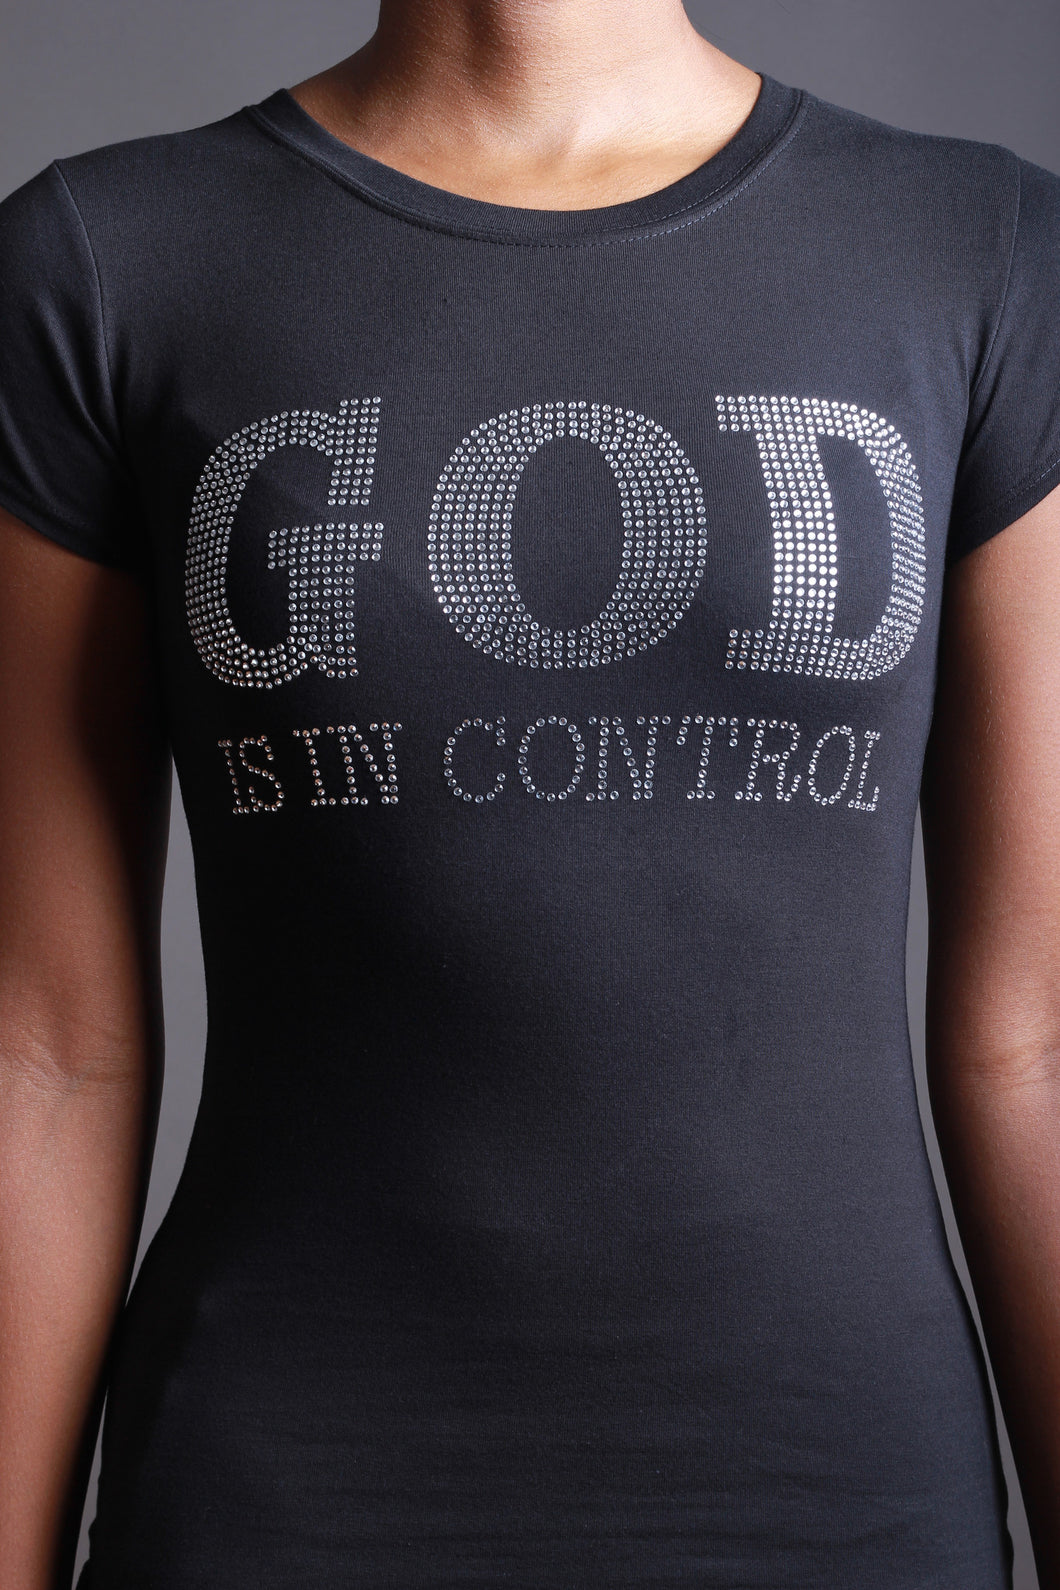 God Is In Control